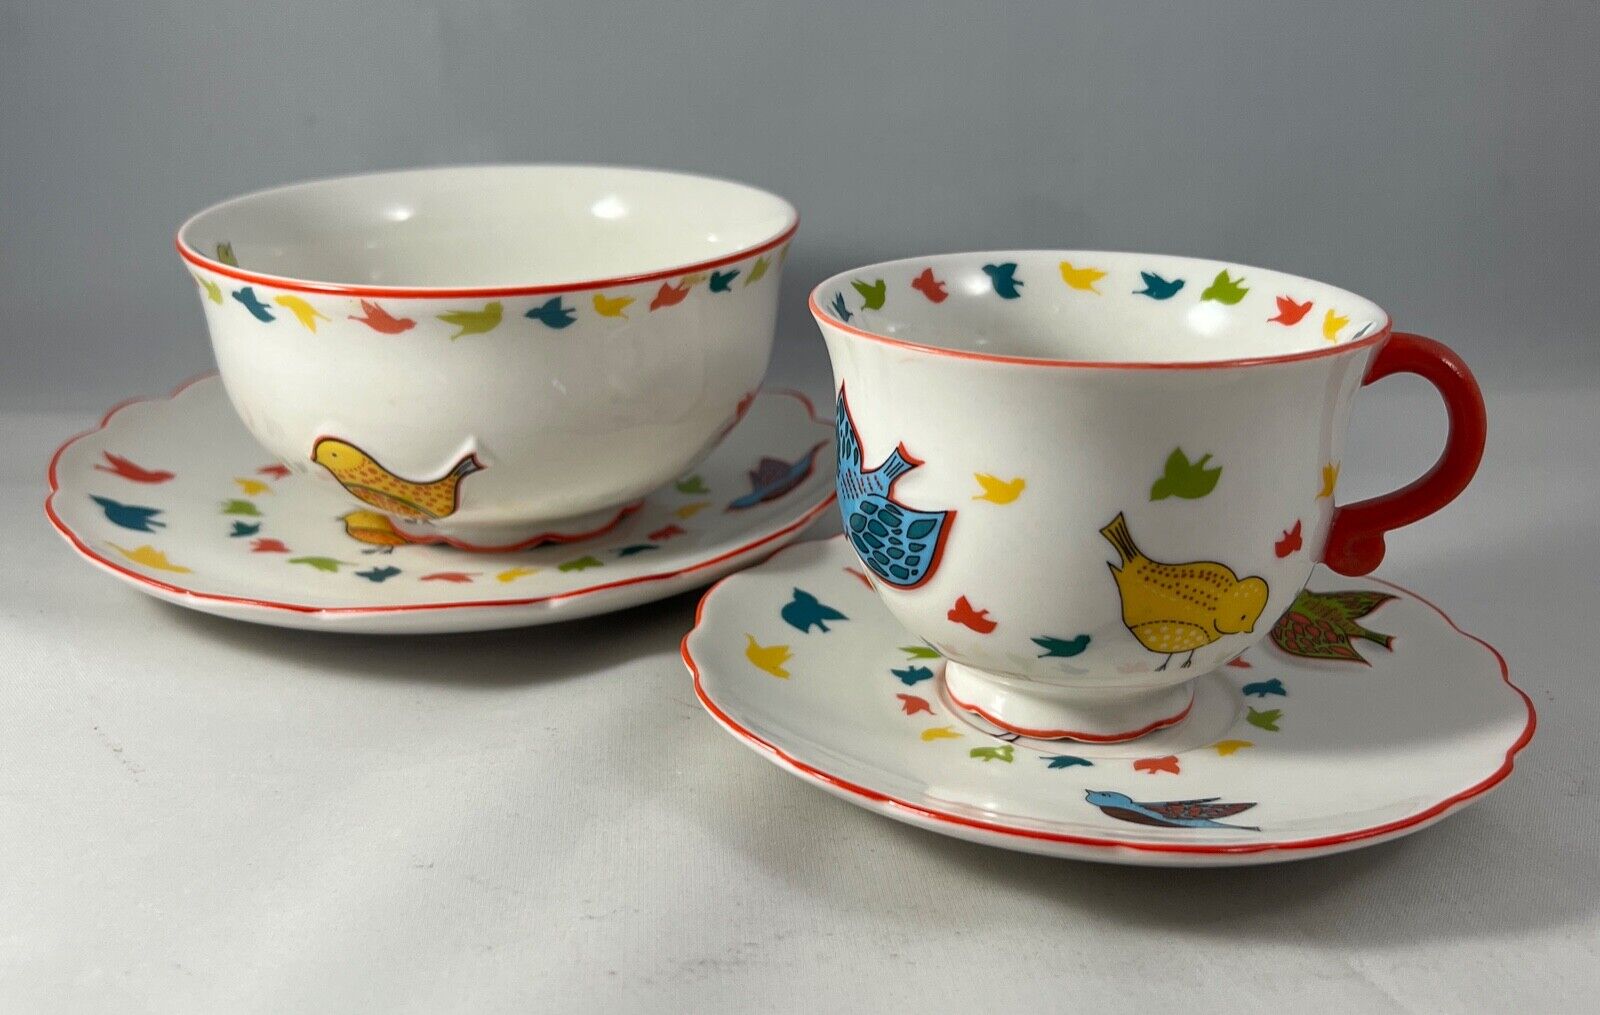 Grace for Anthropologie Tea Cup, Saucer, Bowl, and Plate Ceramic Birds 4 Piece